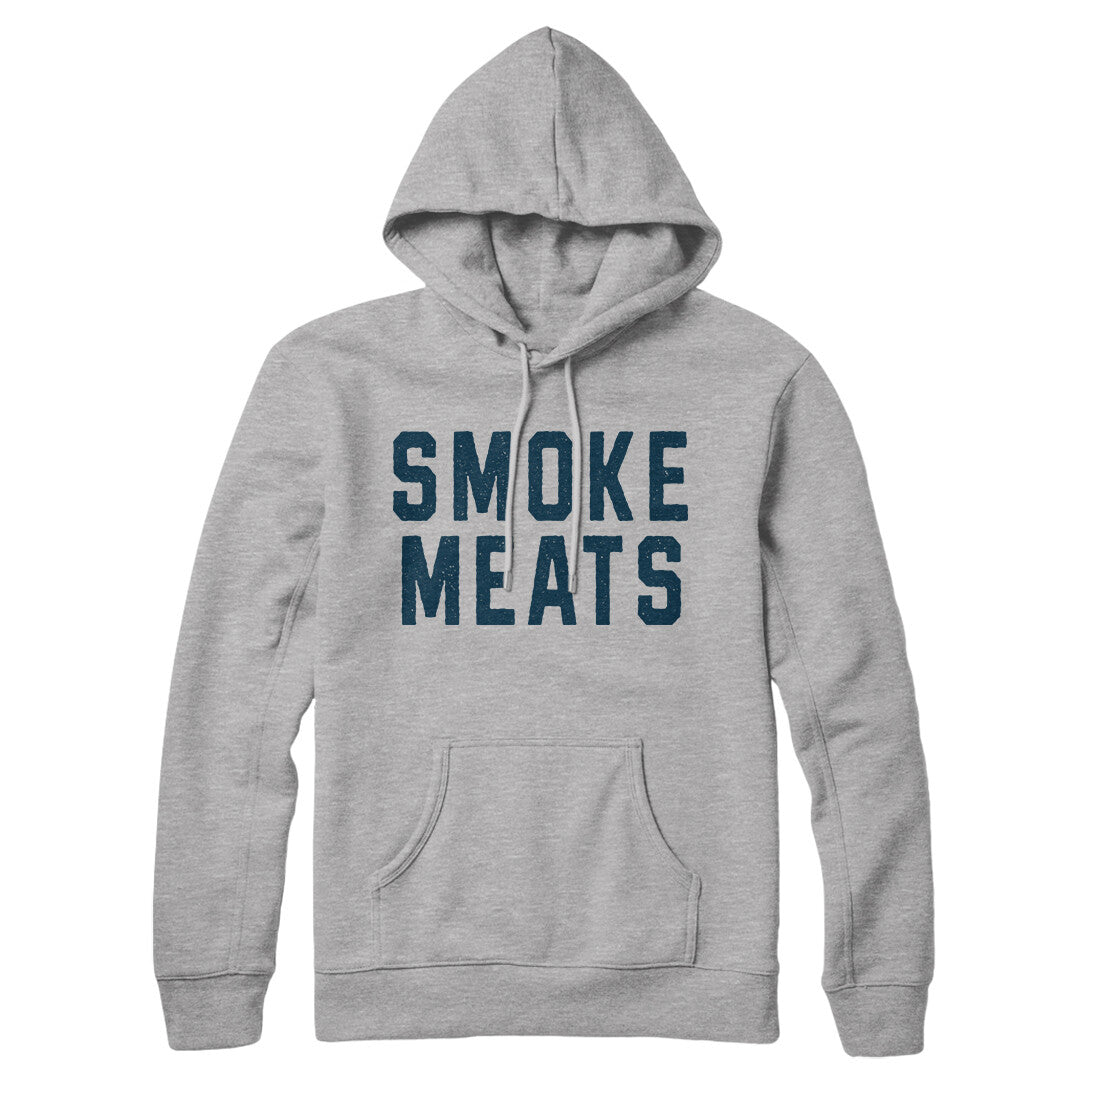 Smoke Meats in Heather Grey Color